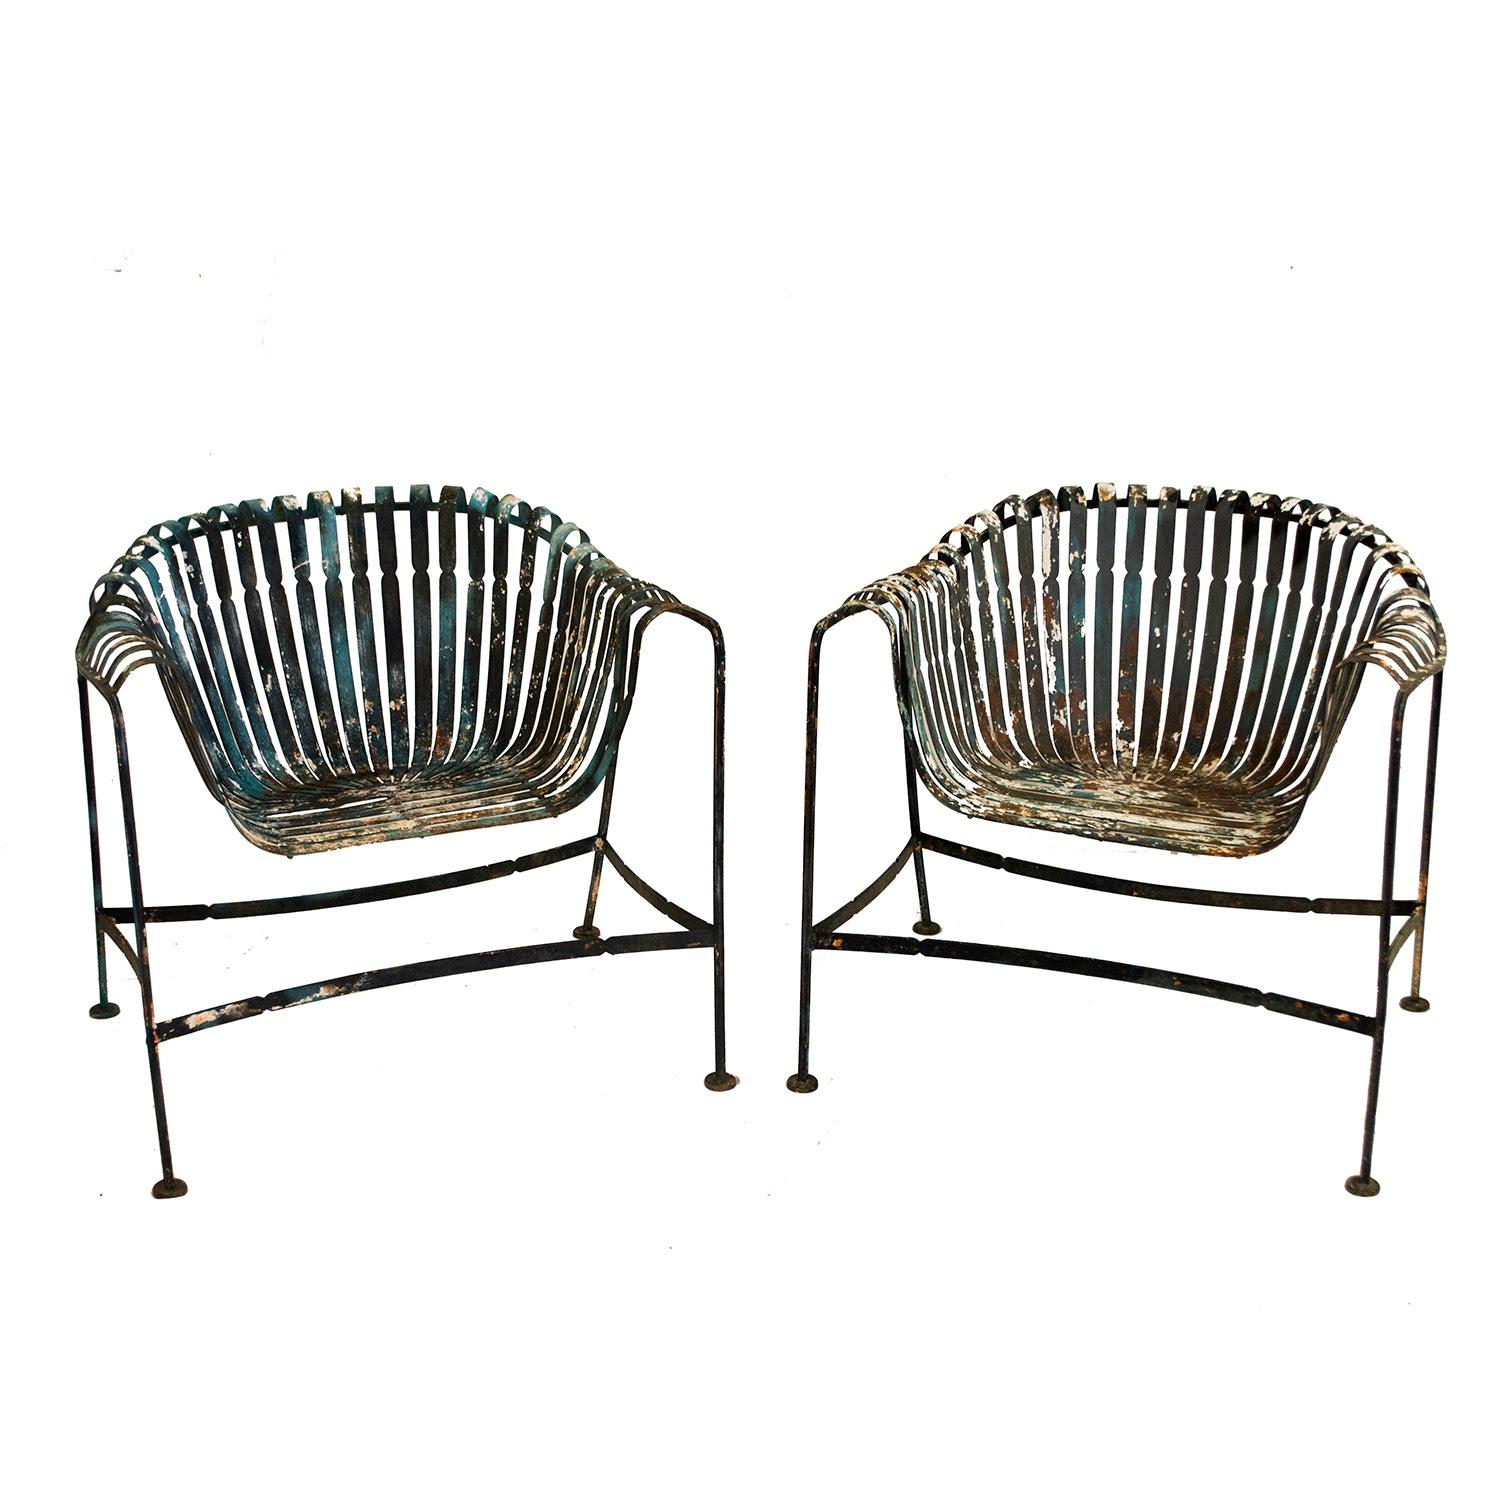 Francois Carre Inspired French Garden Chairs by Woodard In Good Condition For Sale In Wilton, CT